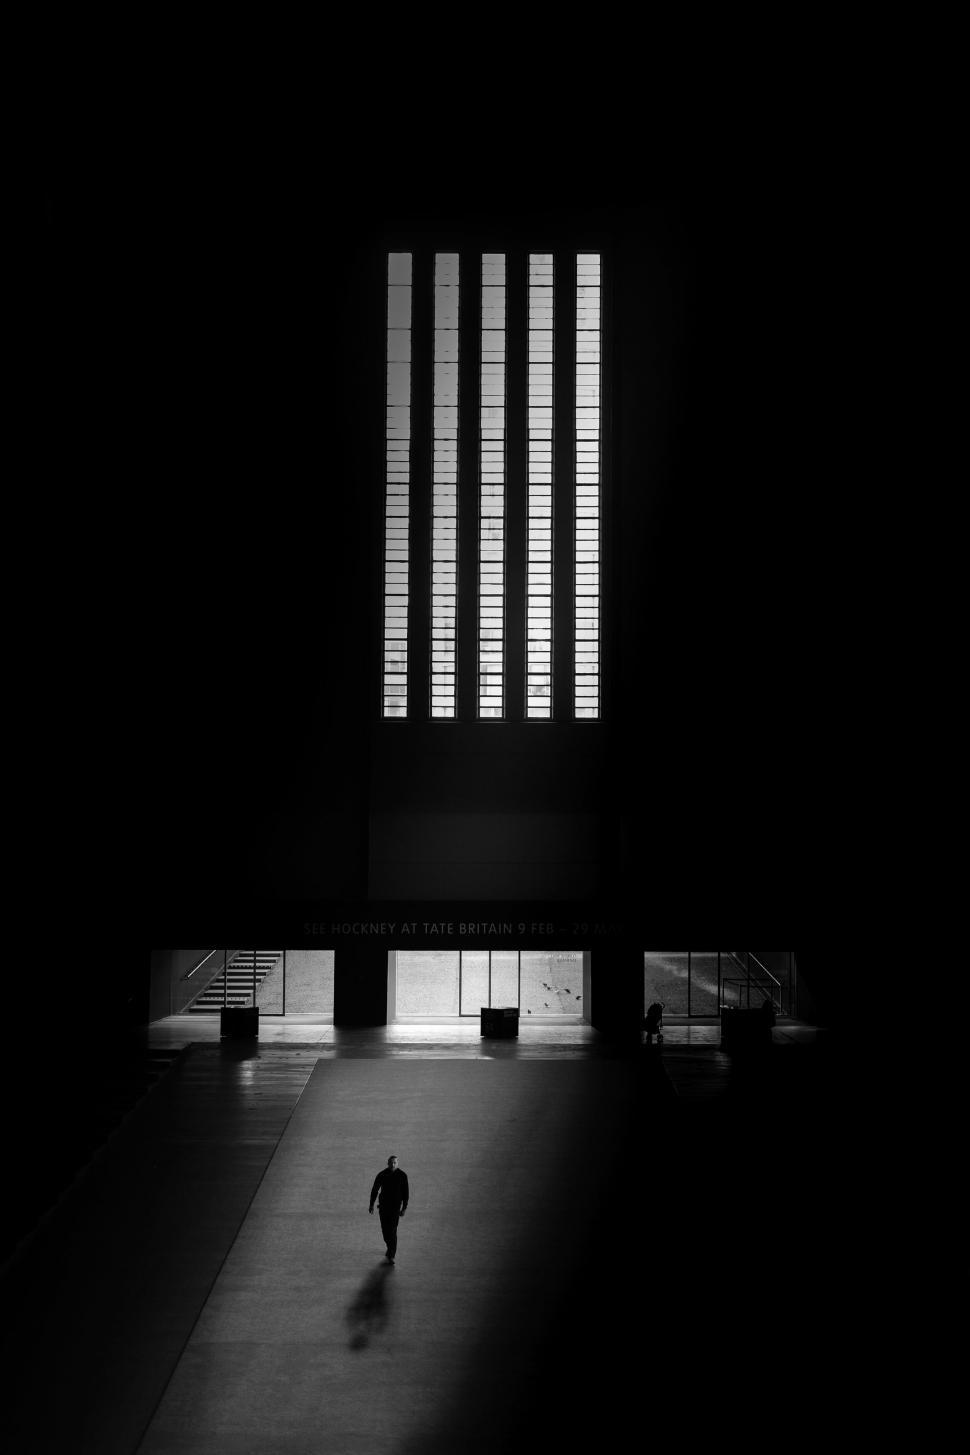 Free Image of Solitary figure walking in Tate Britain 